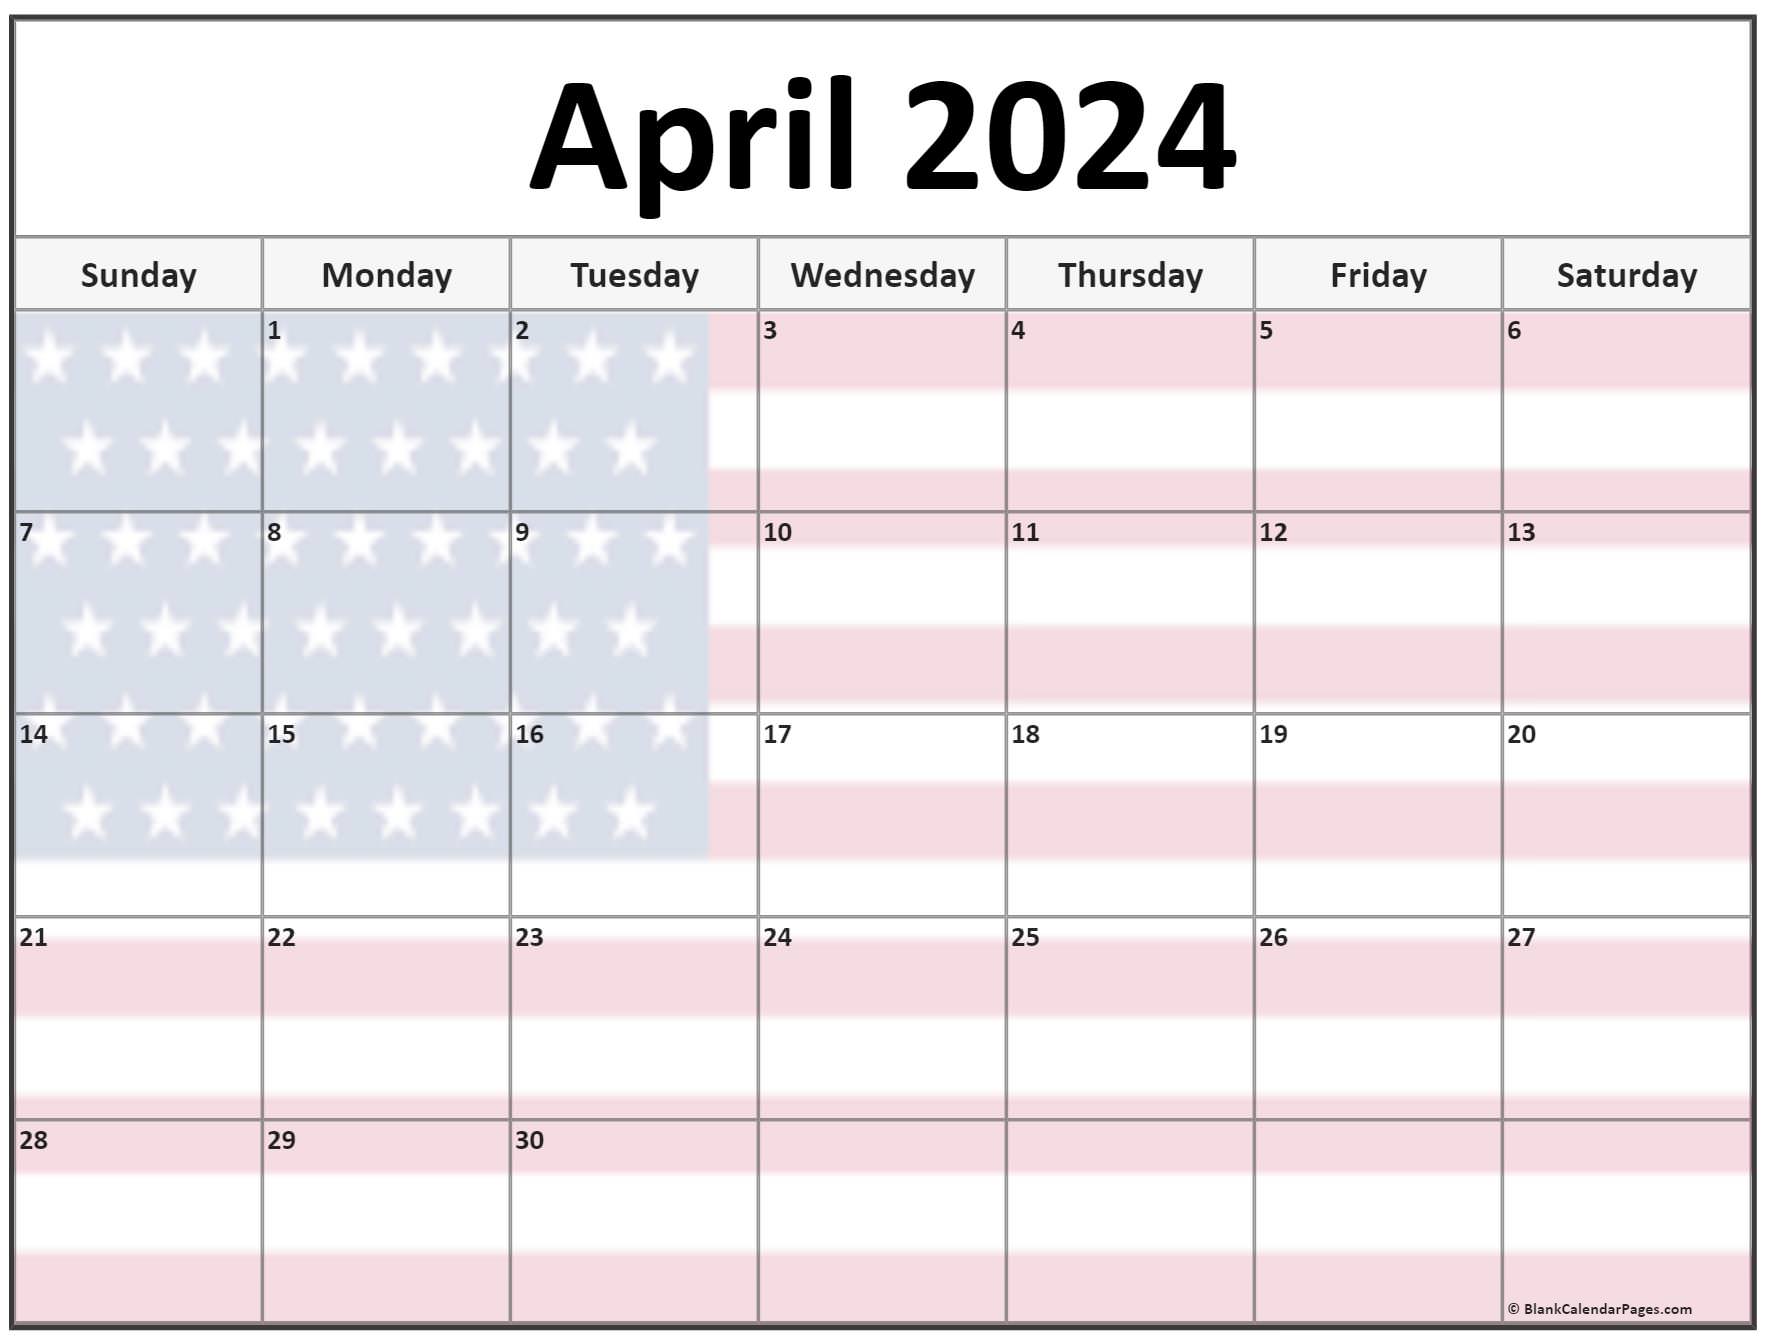 Collection of April 2022 photo calendars with image filters.